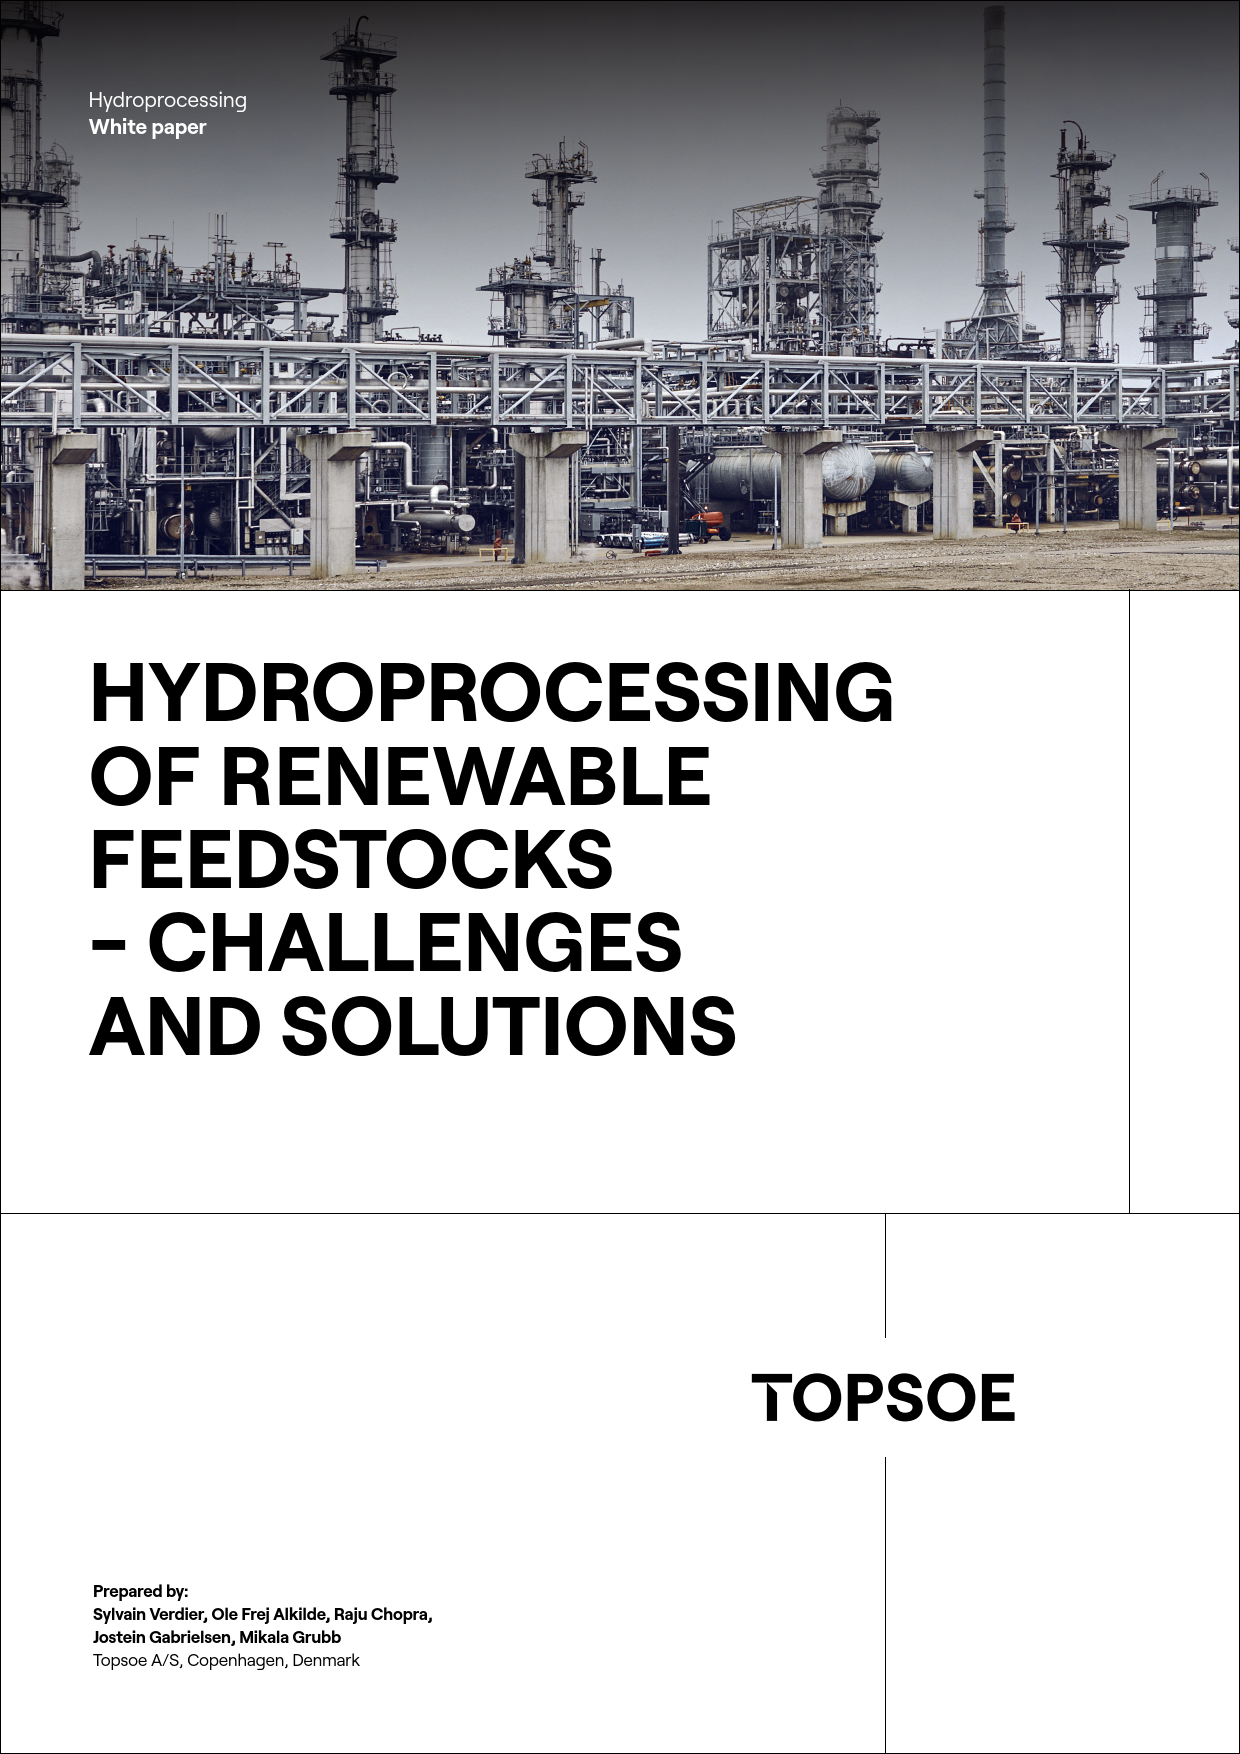 Hydroprocessing of renewable feedstocks - challenges and solutions 